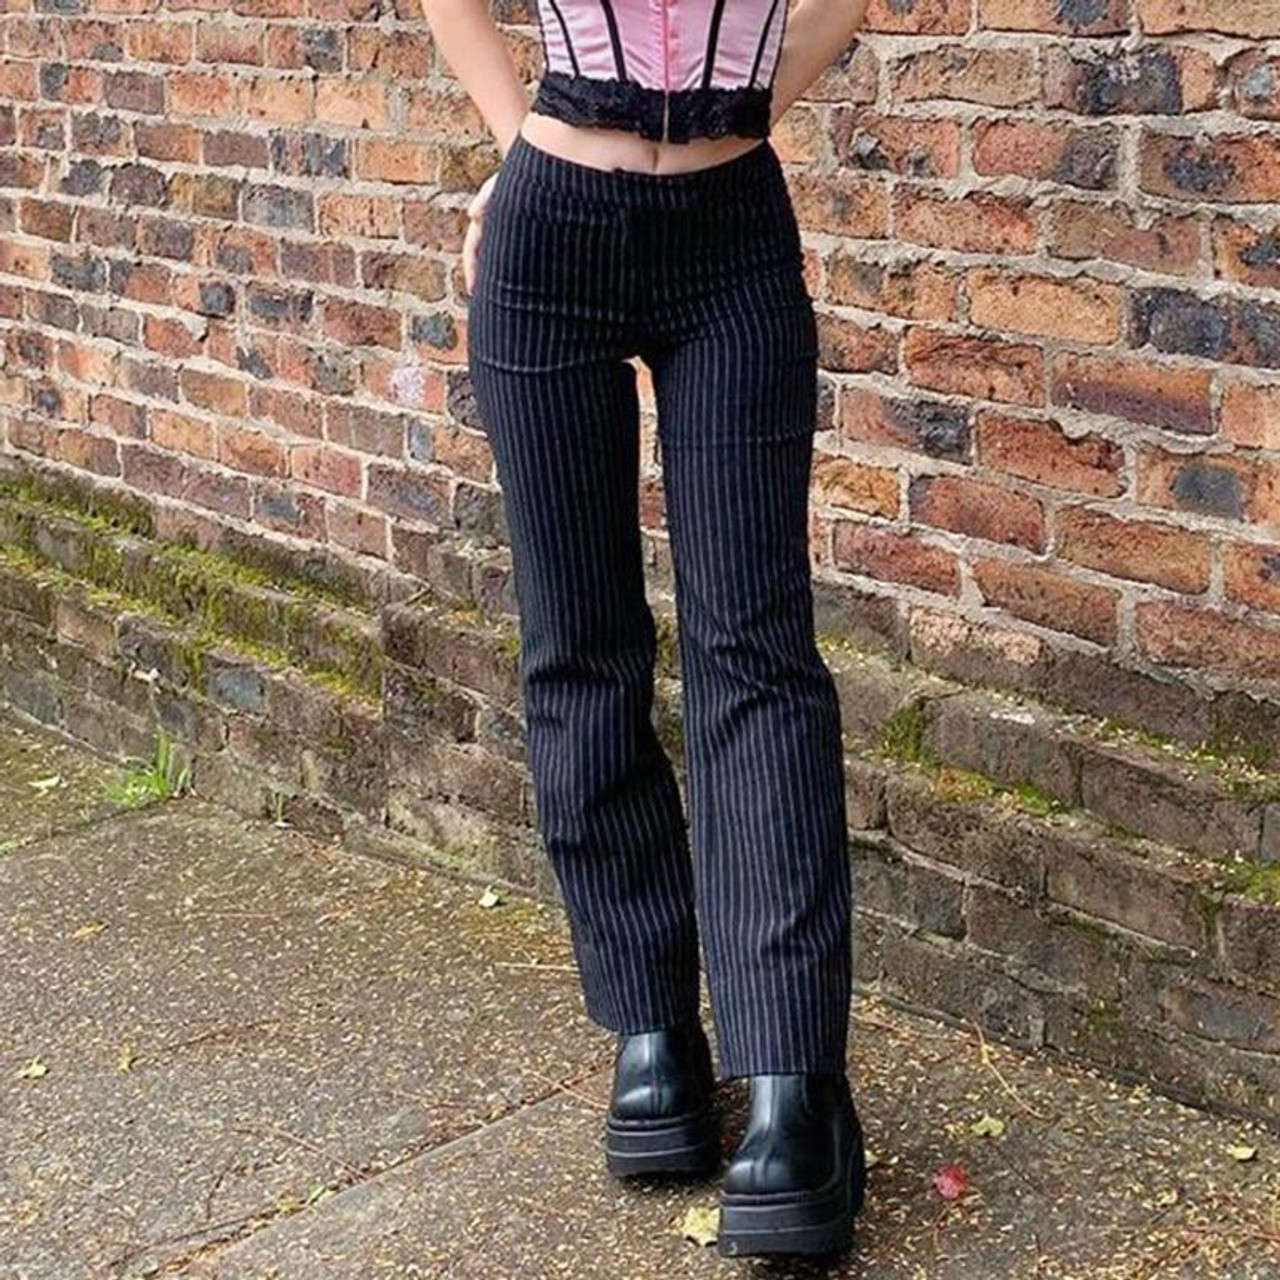 Black Vertical Striped Skinny Pants Summer Outfits (2 ideas & outfits)